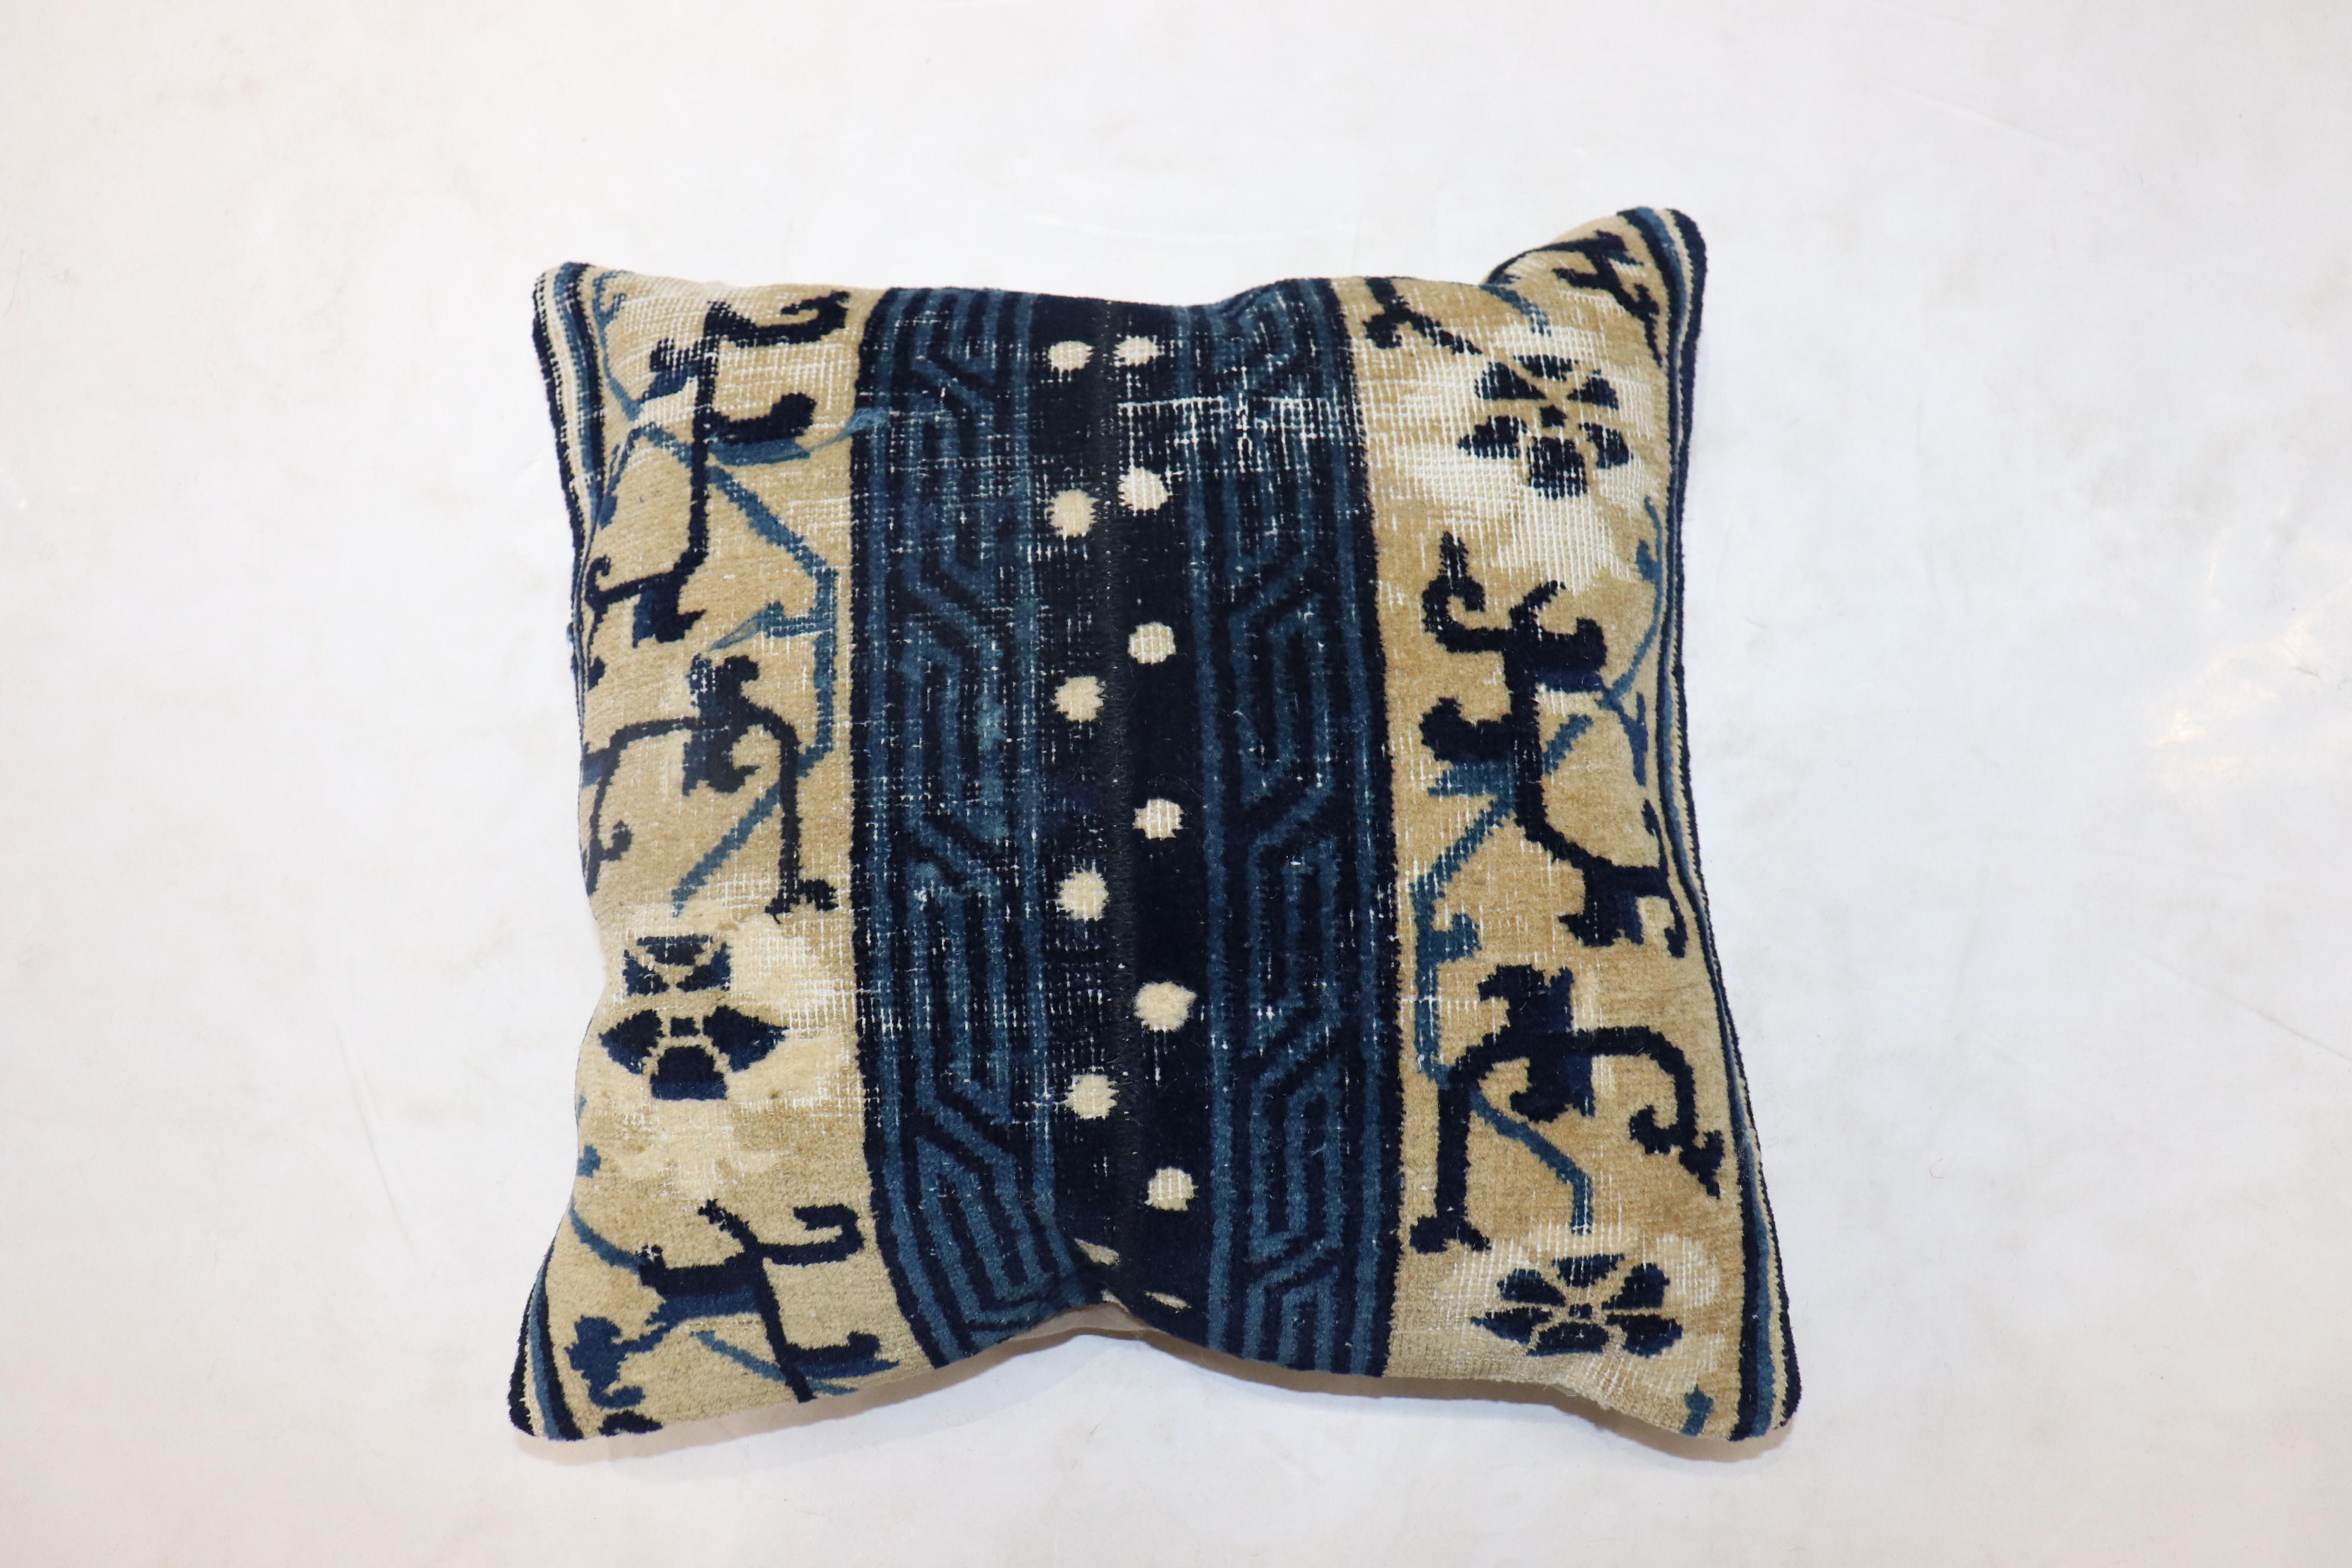 A pillow made from a 19th-century Chinese rug. Zipper closure and insert included.

Measures: 17” x 18''.